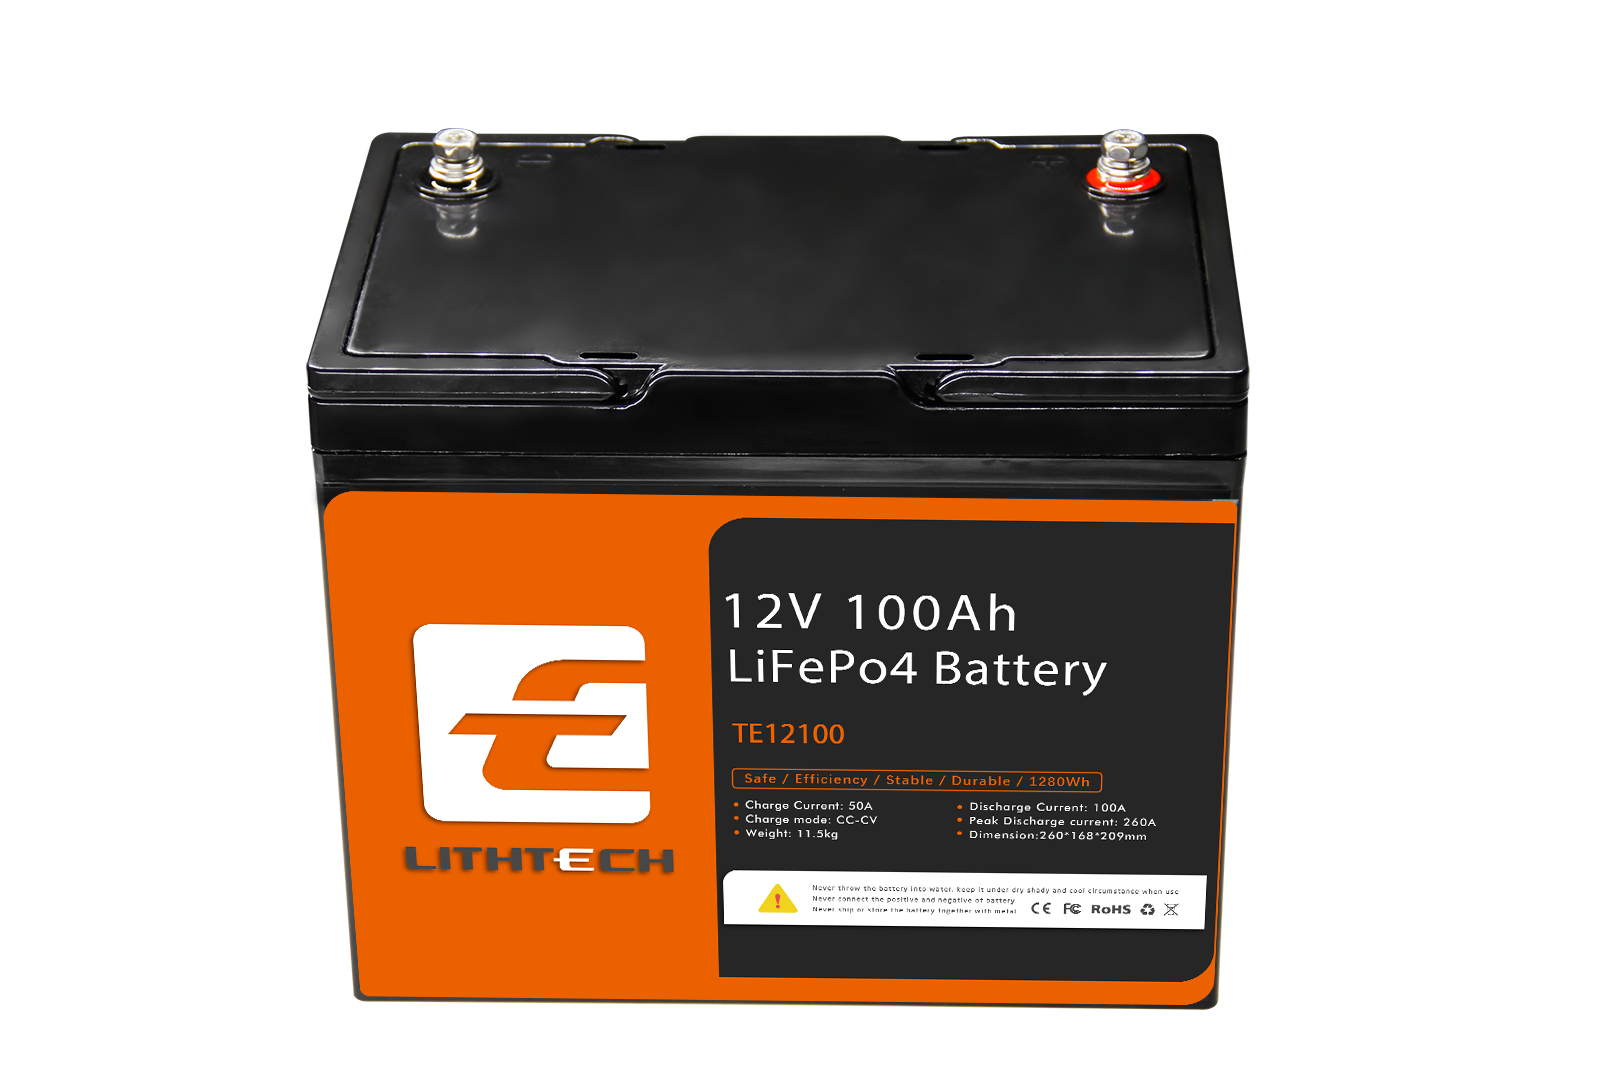 Lithtech Solar Battery 12v 100ah Lifepo4 Battery Lithium Ion Battery 1.28kwh for Solar Energy Storage System